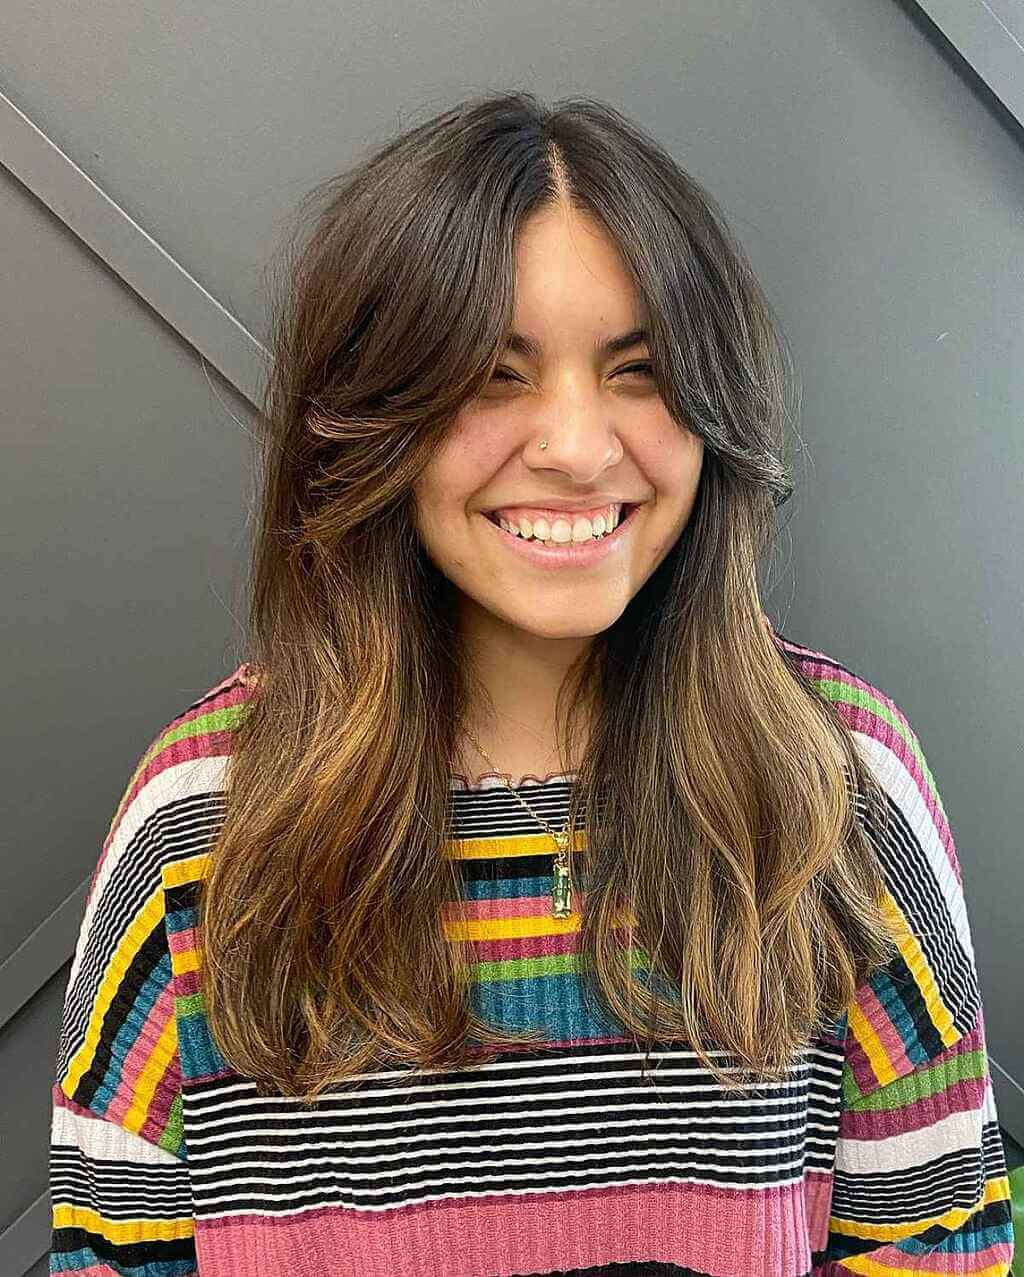 How to style long hair with curtain bangs?